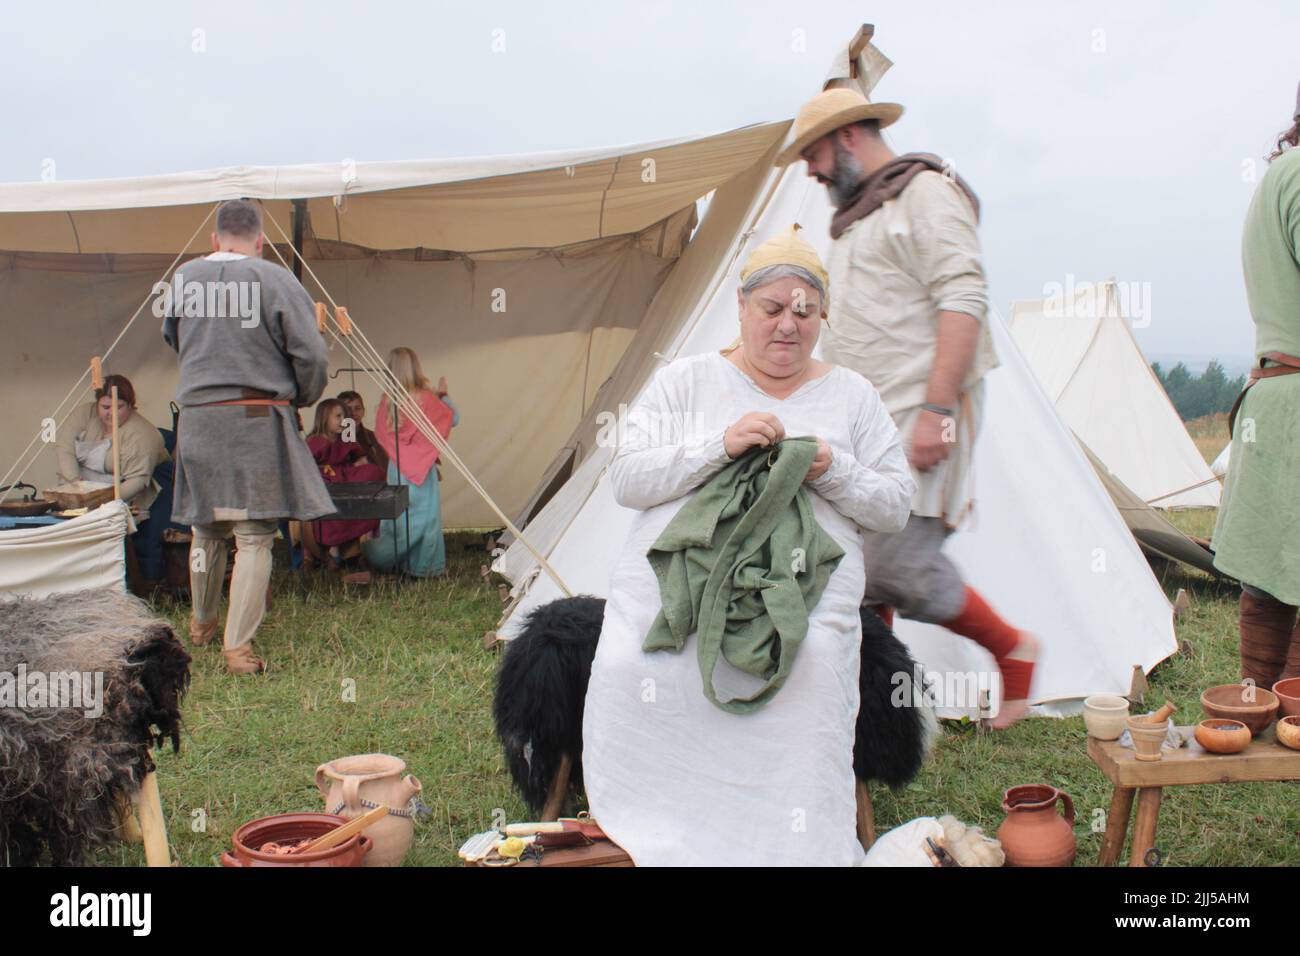 Viking peasant hand sewing a garment with encampment in the background.  Upholland green fayre, Lancashire, England 23-07-2022 Stock Photo